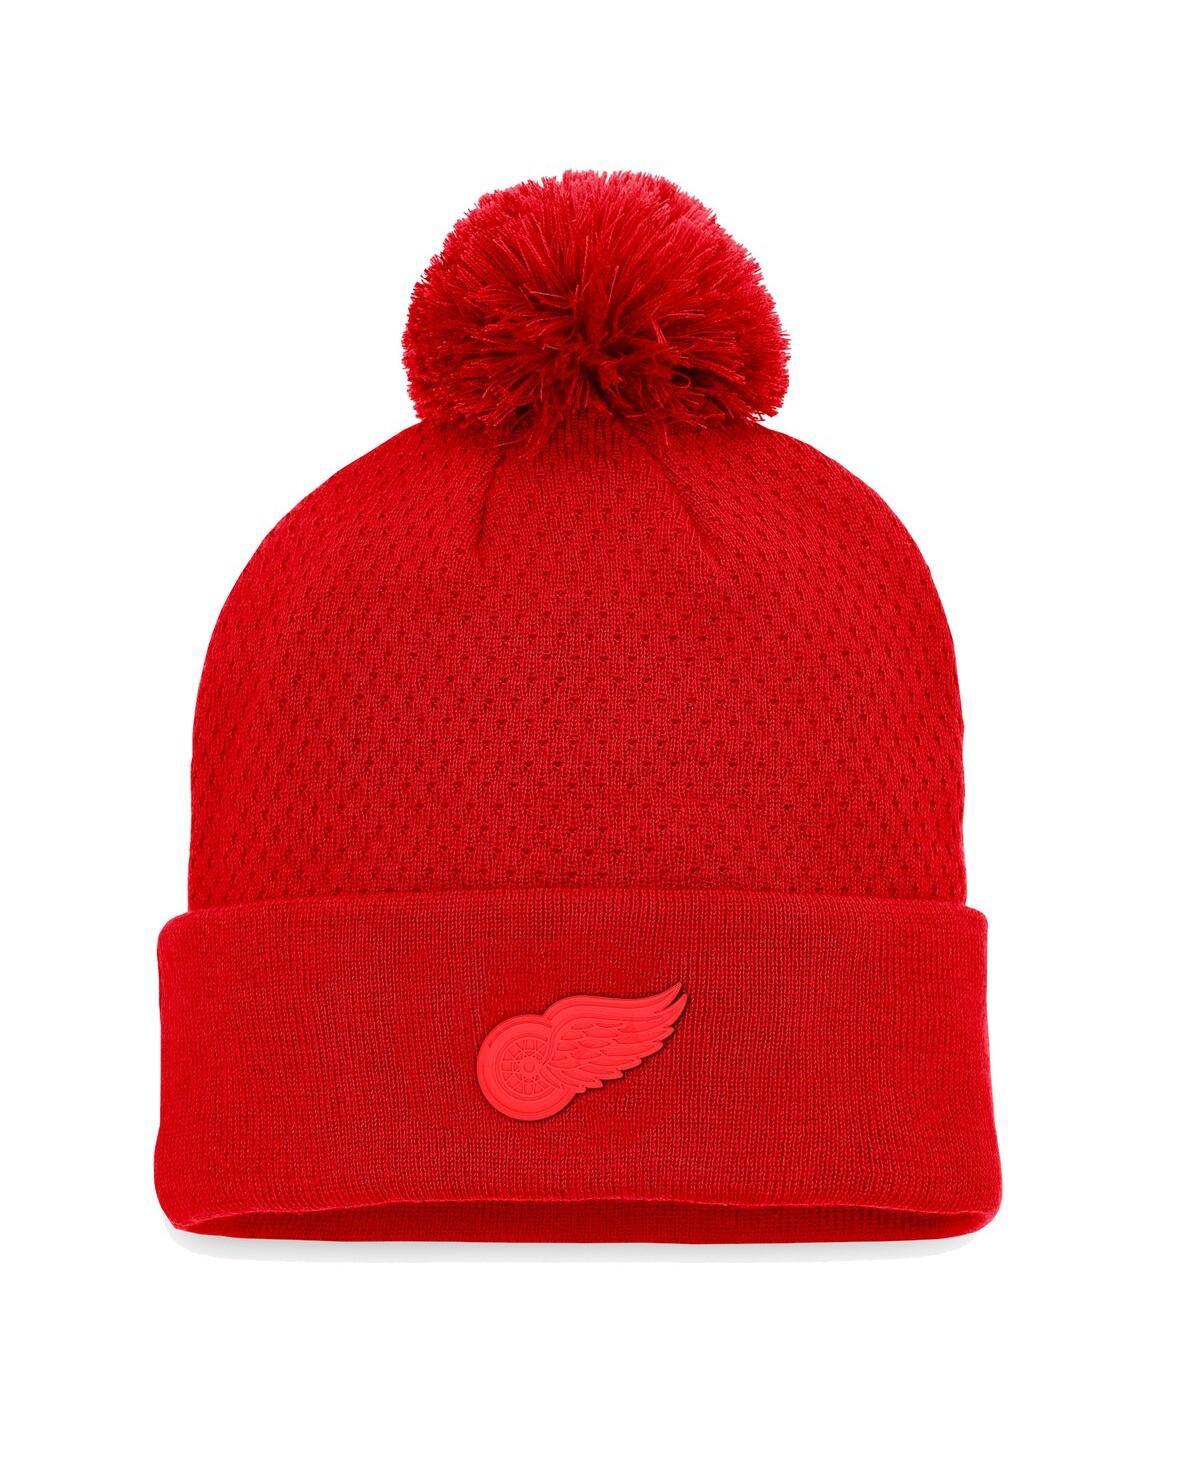 Women's Fanatics Red Detroit Red Wings Authentic Pro Road Cuffed Knit Hat with Pom - Red